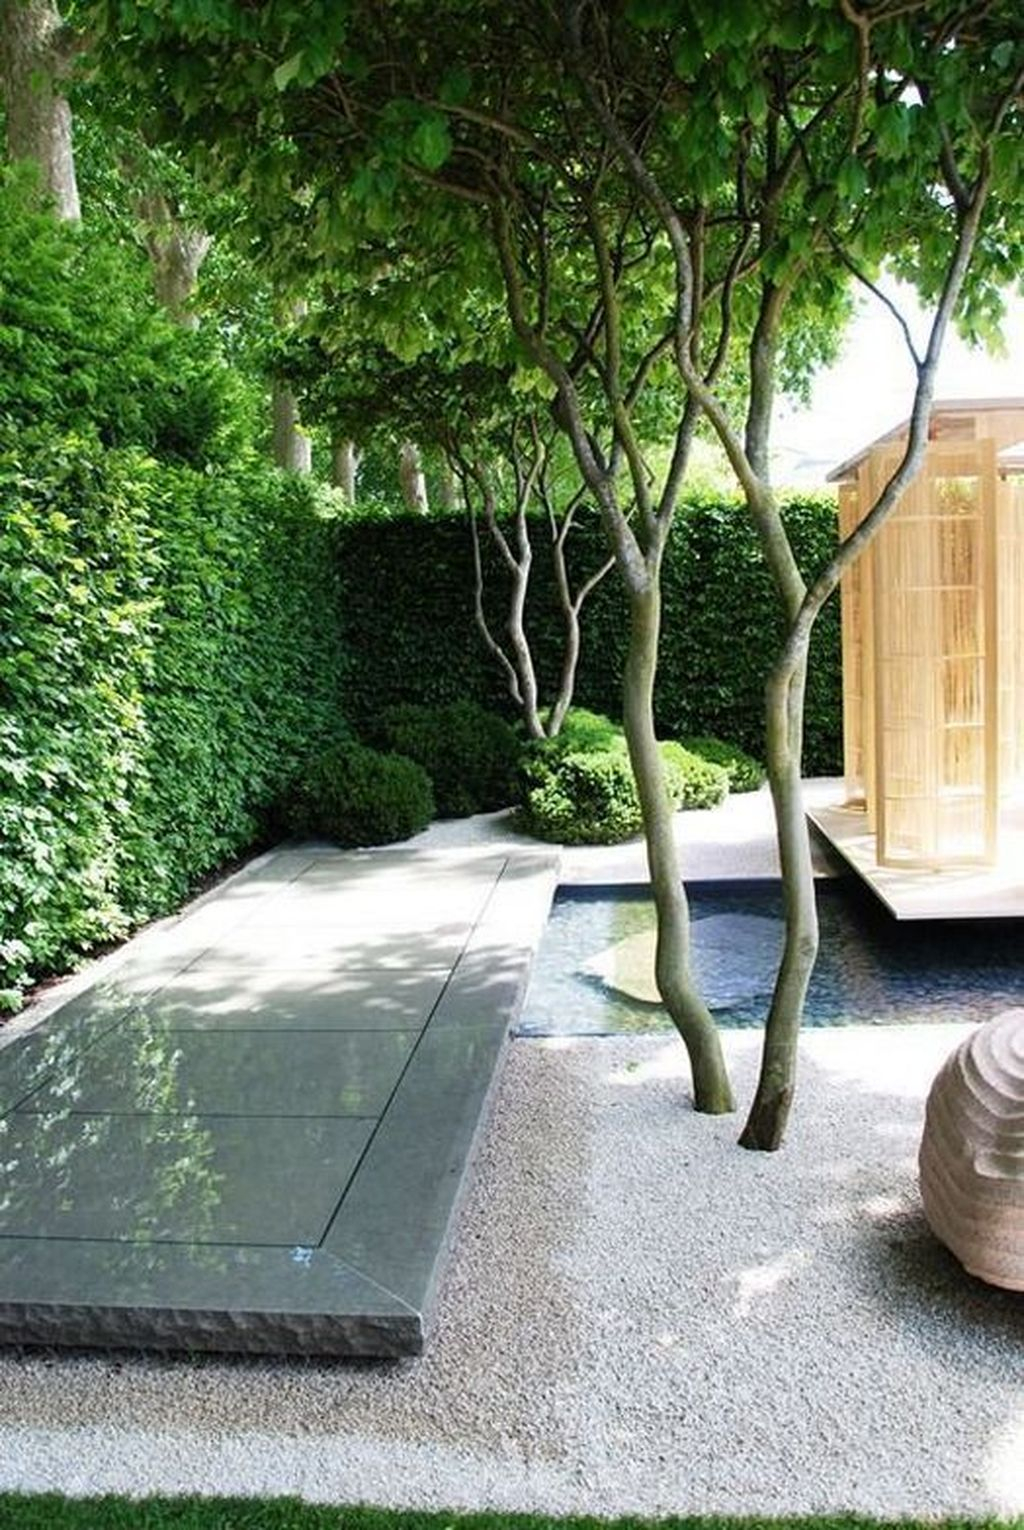 Amazing Garden Design Ideas For Small Space To Try 02